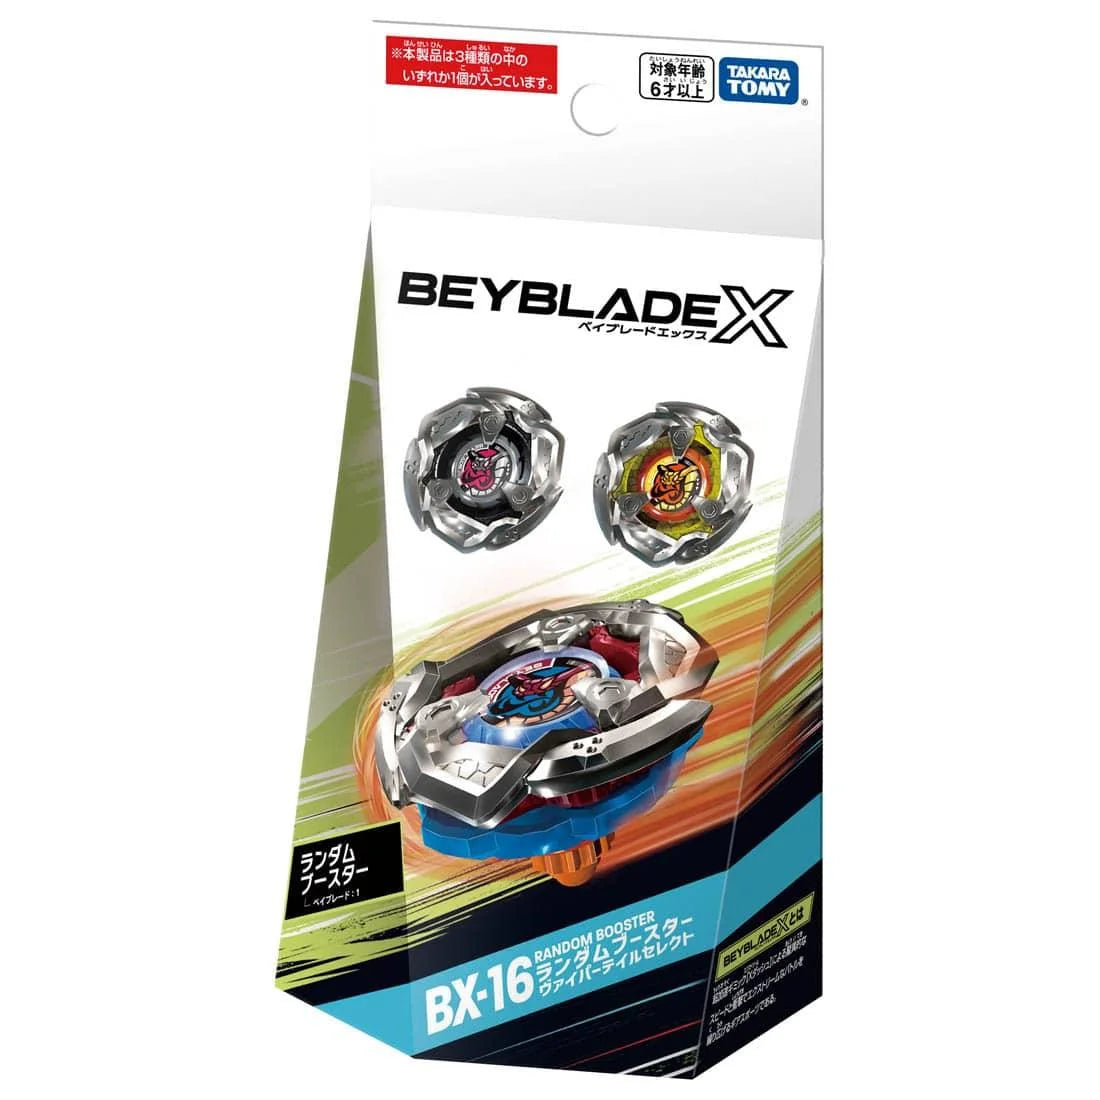 BX 16 Viper tail select Beyblade X packaging